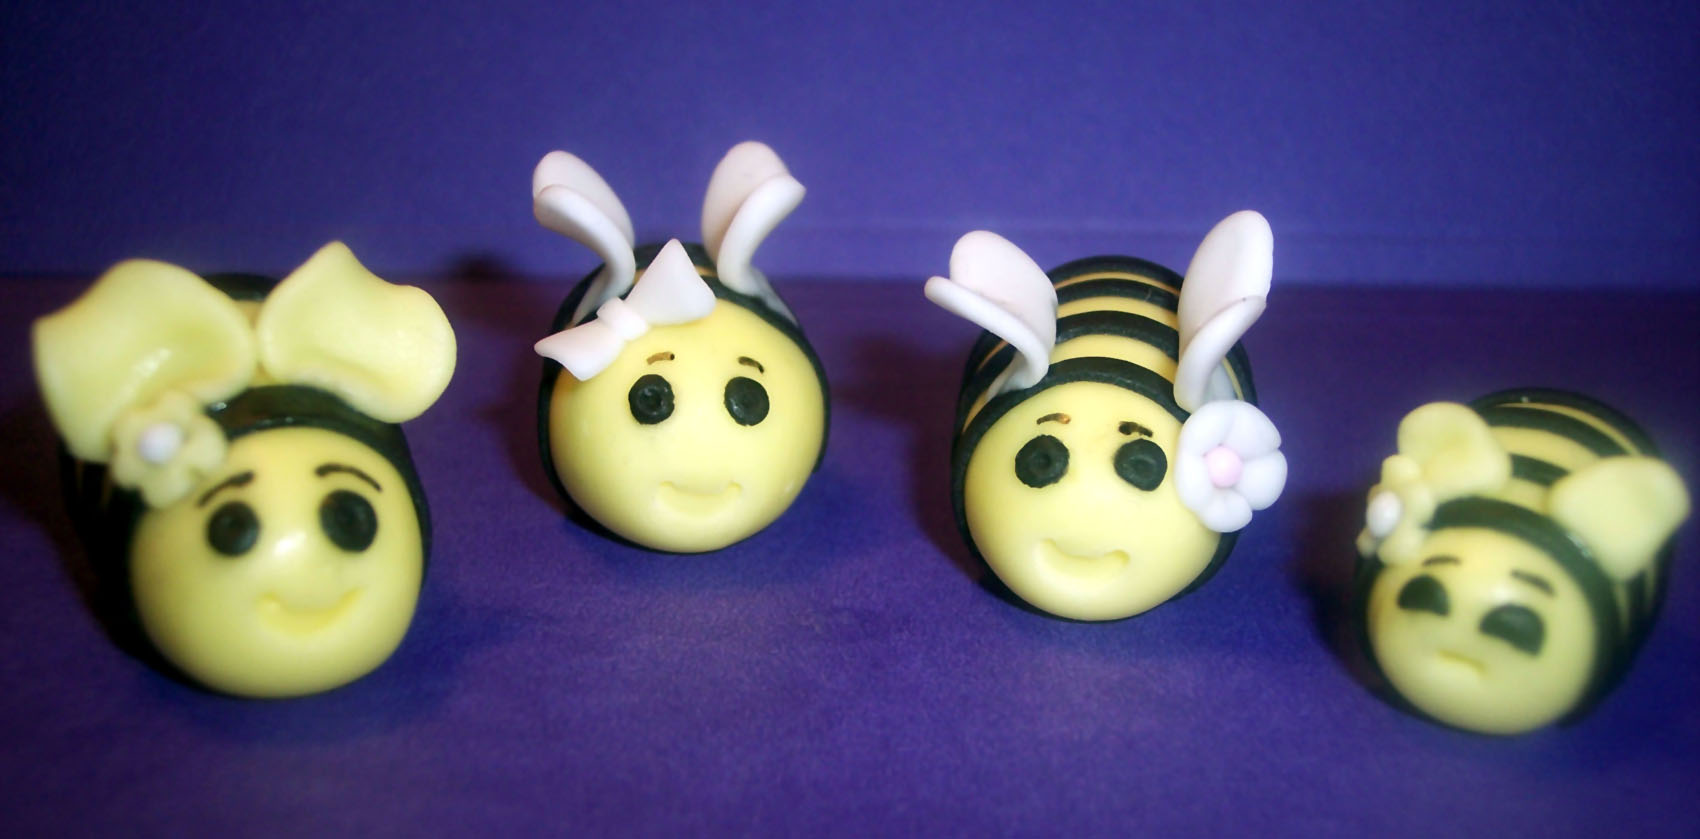 How to make Fondant Bees cake Topper